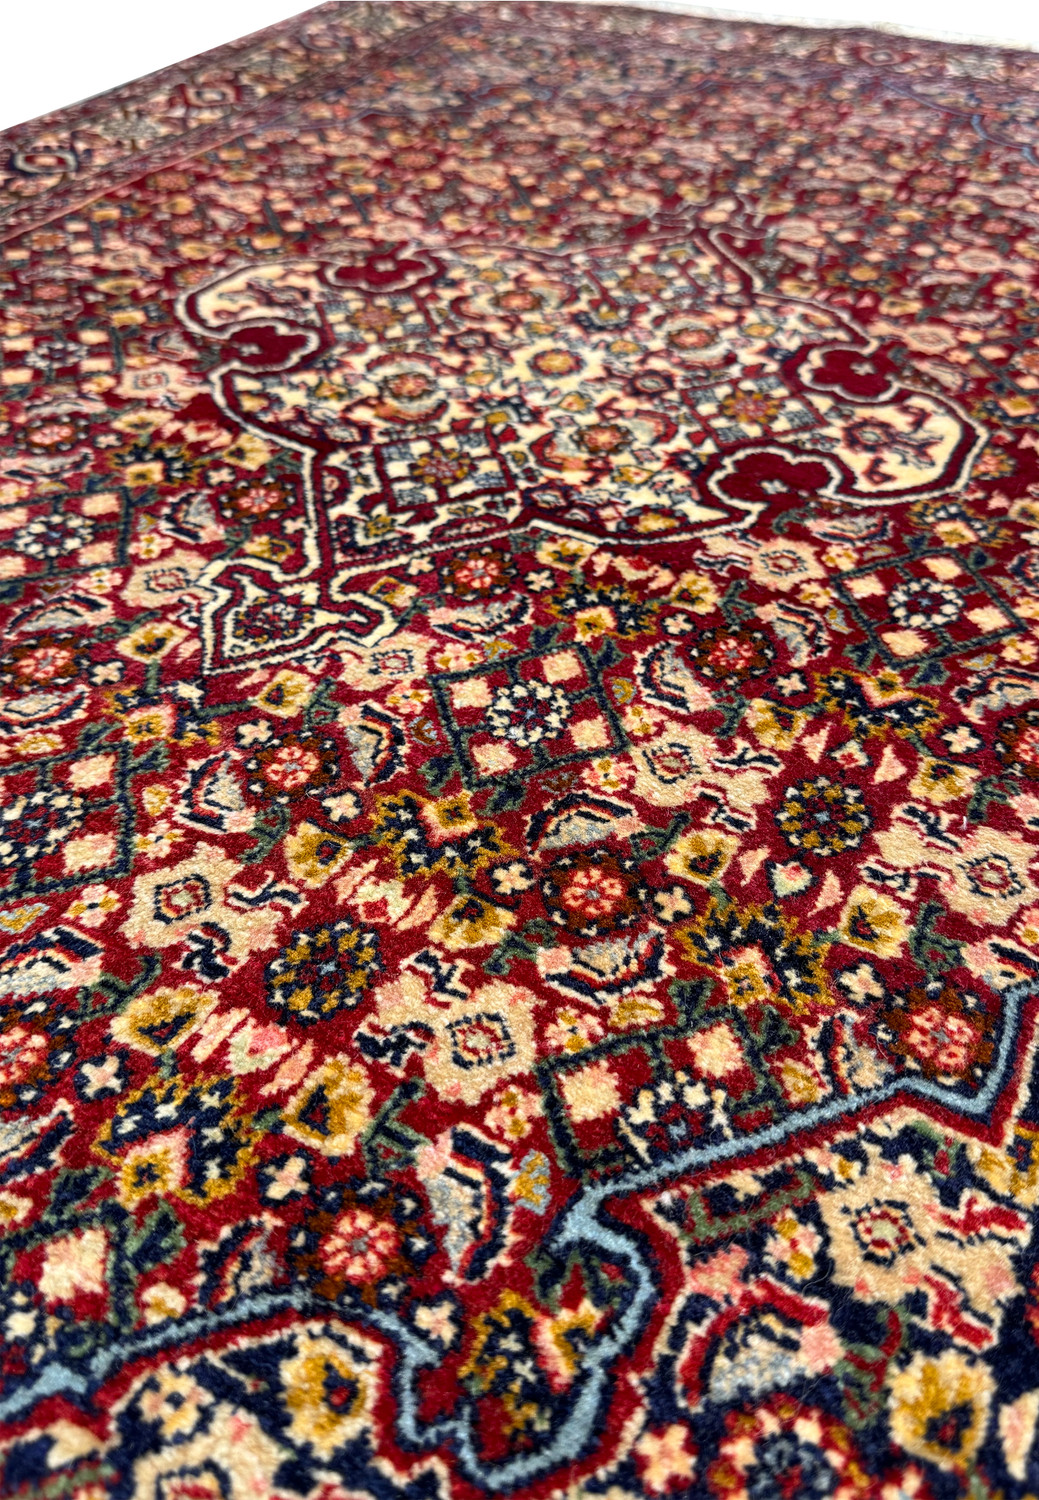 Close-up angle showing the dense weave and vivid colors of the floral and geometric motifs on a 3 x 4'7" Persian Bidjar rug